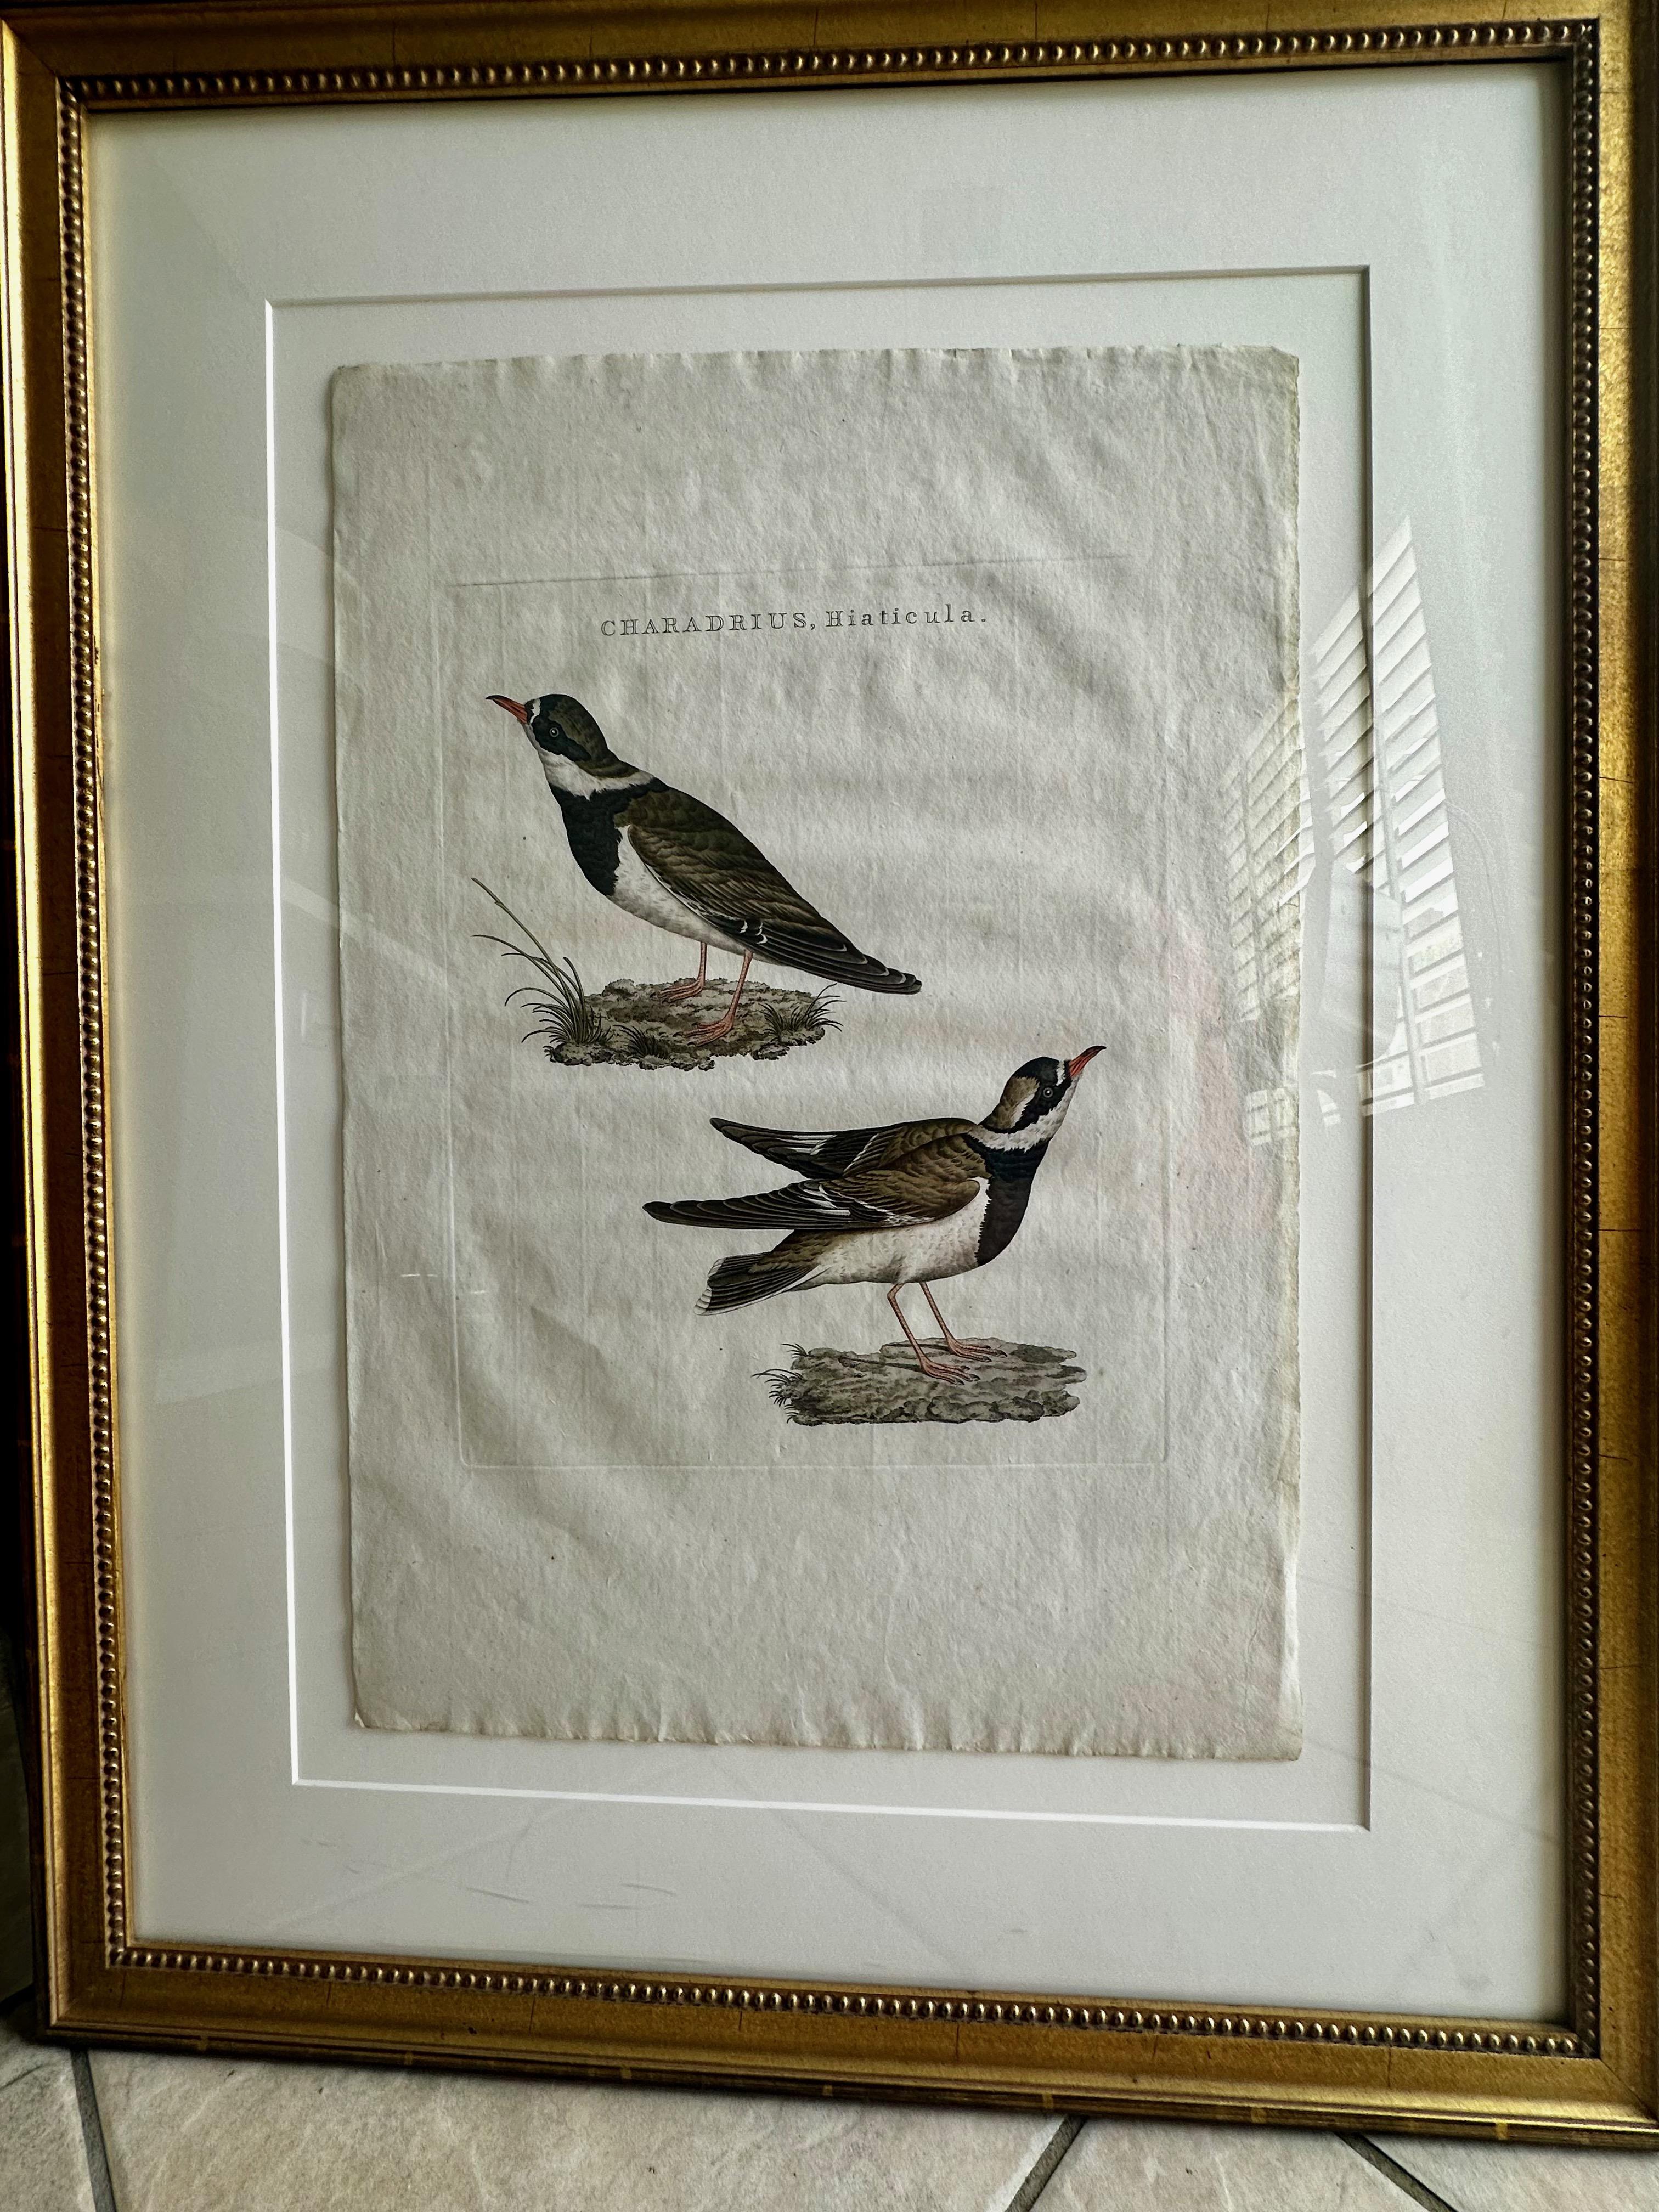 Framed large folio sized hand colored copper plate engraving of a bird titled: Charadrius, Hiaticule, on hand made laid linen rag. A collaborative work by Cornelius Nozeman, Christian Sepp, Martyn Houttyn, and completed by Janus Sepp. Published over